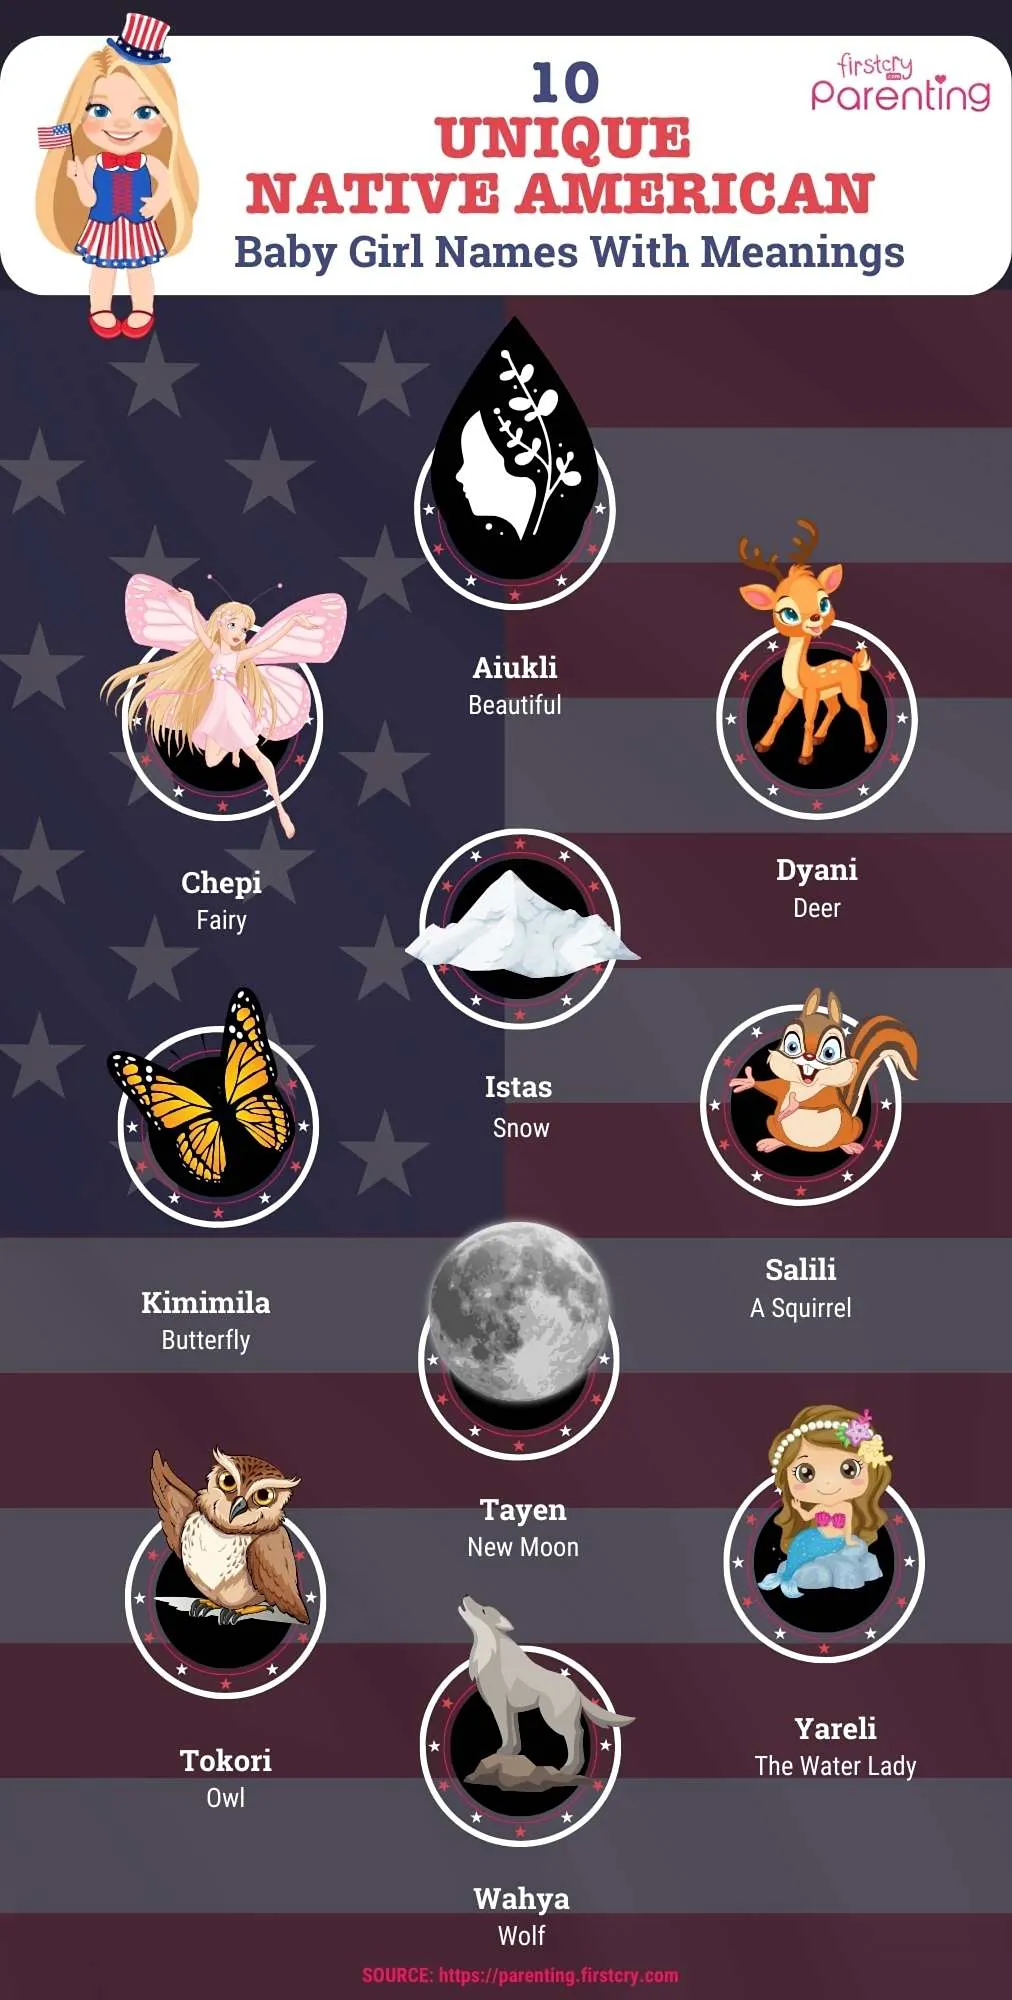 Native American Girl Names With Meanings - Infographic